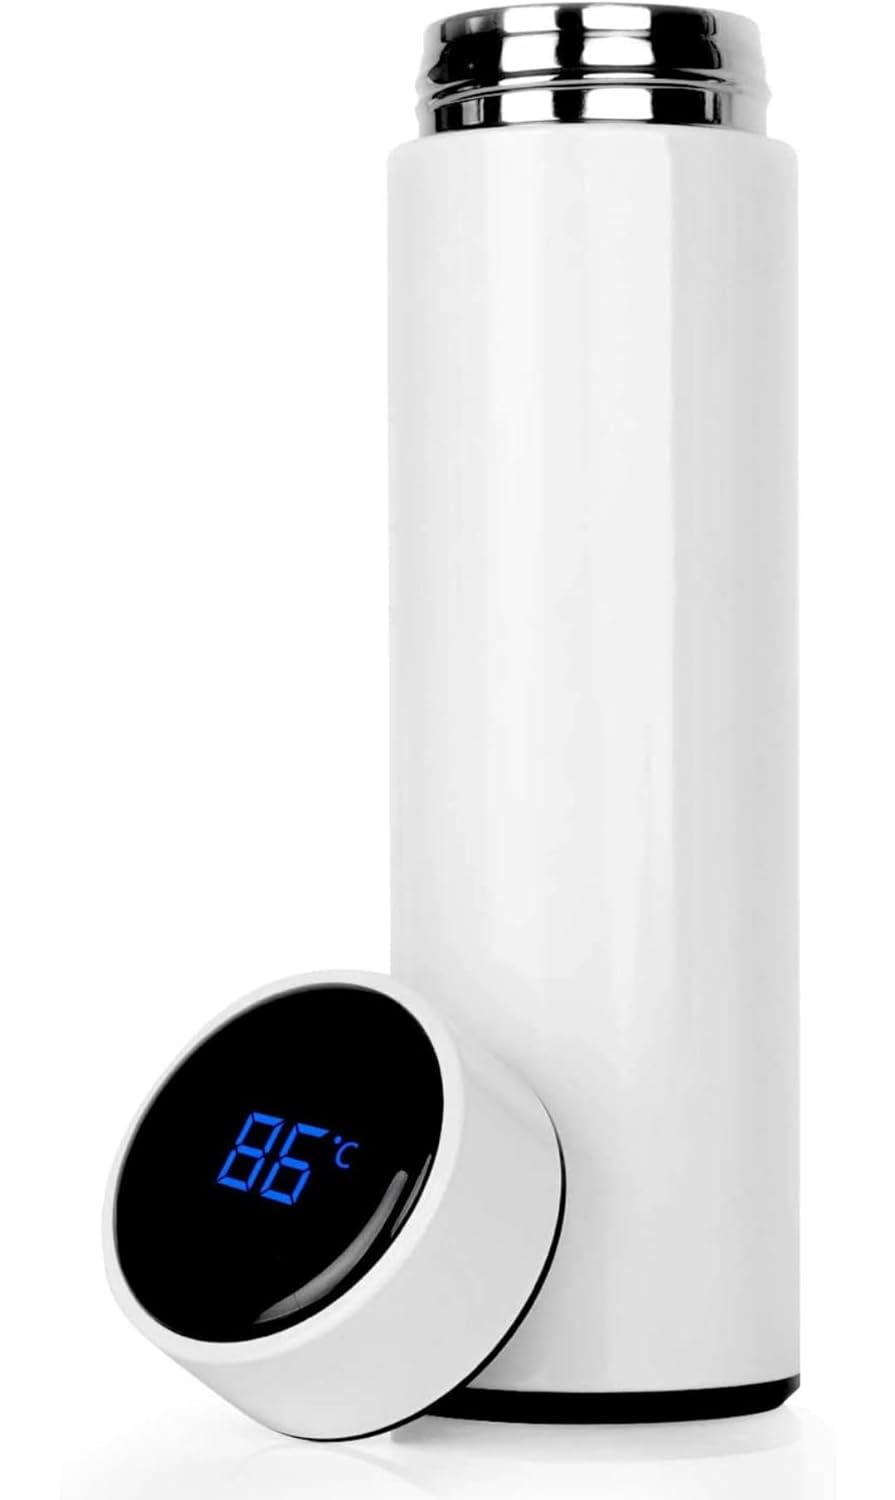 LCD Display Stainless Steel Thermos - Smart Temperature Indicator | Office, Home, Gym, Travel